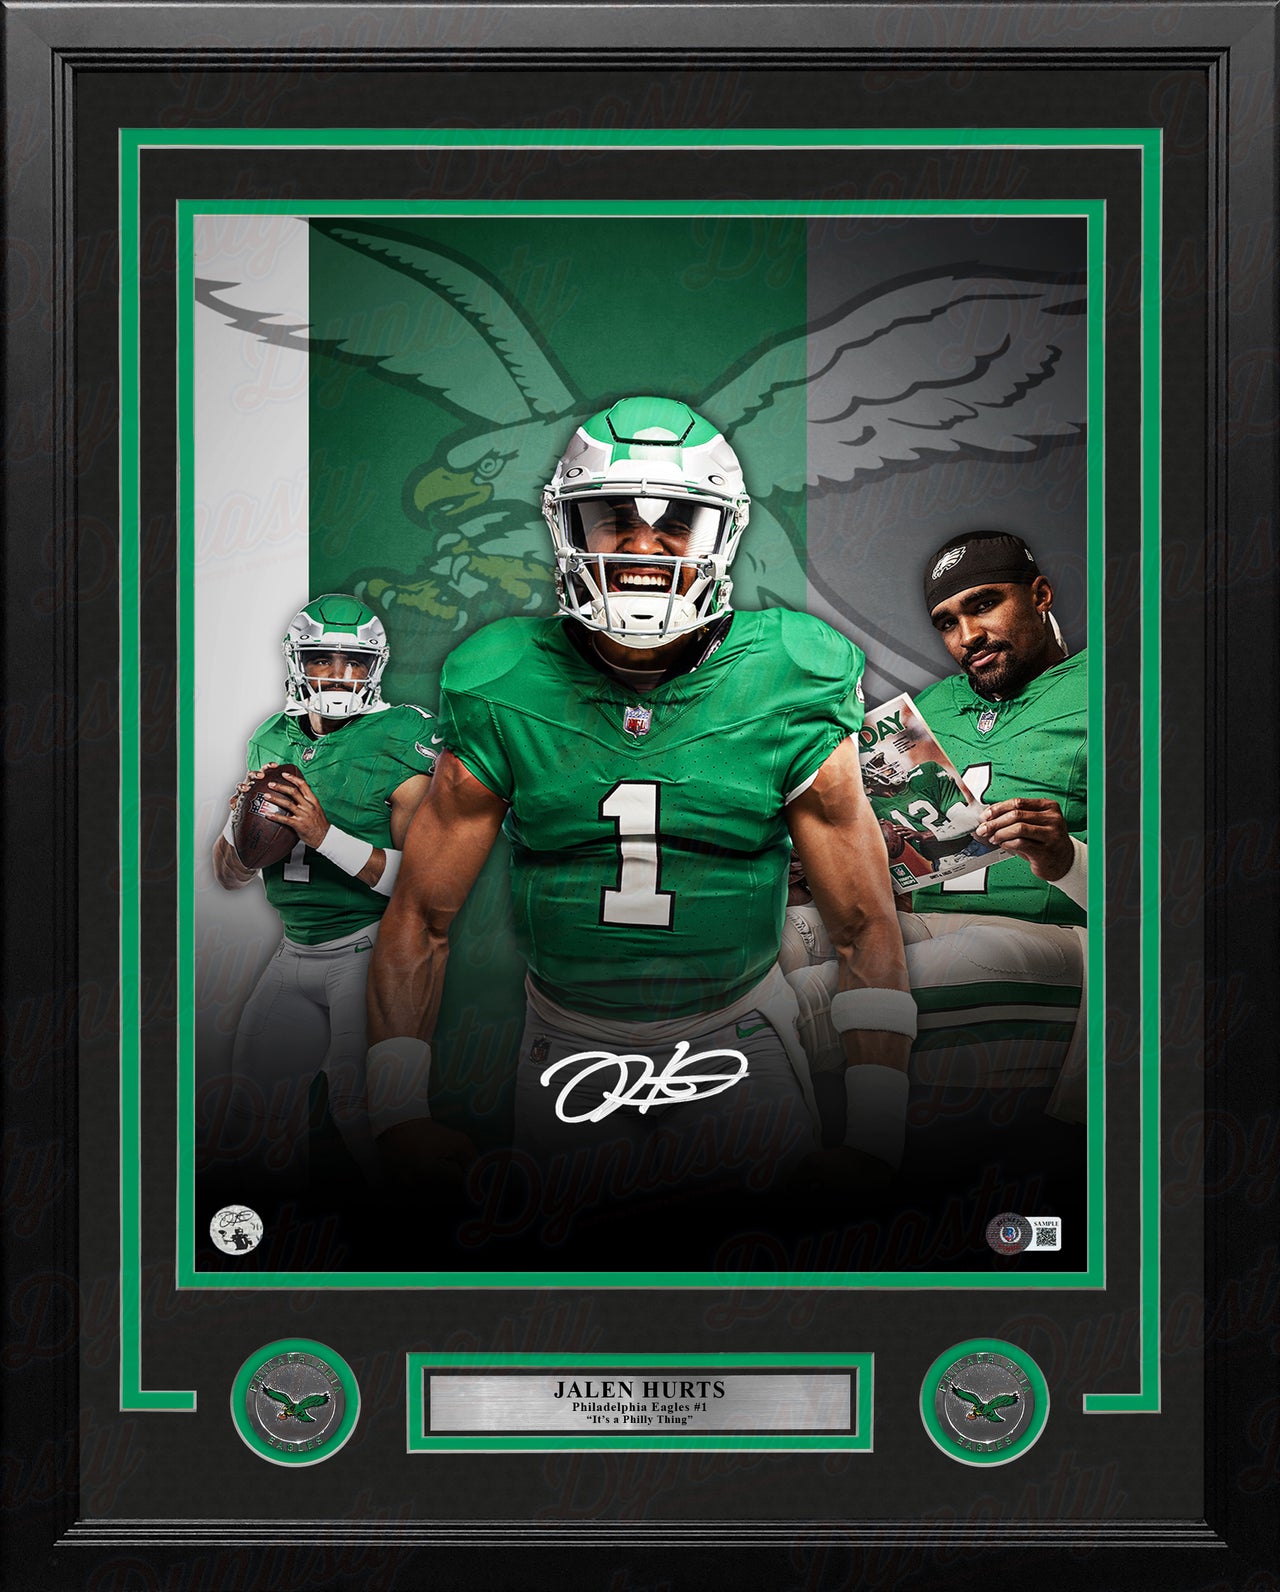 Jalen Hurts Philadelphia Eagles Autographed 16" x 20" Framed Kelly Green Collage Football Photo